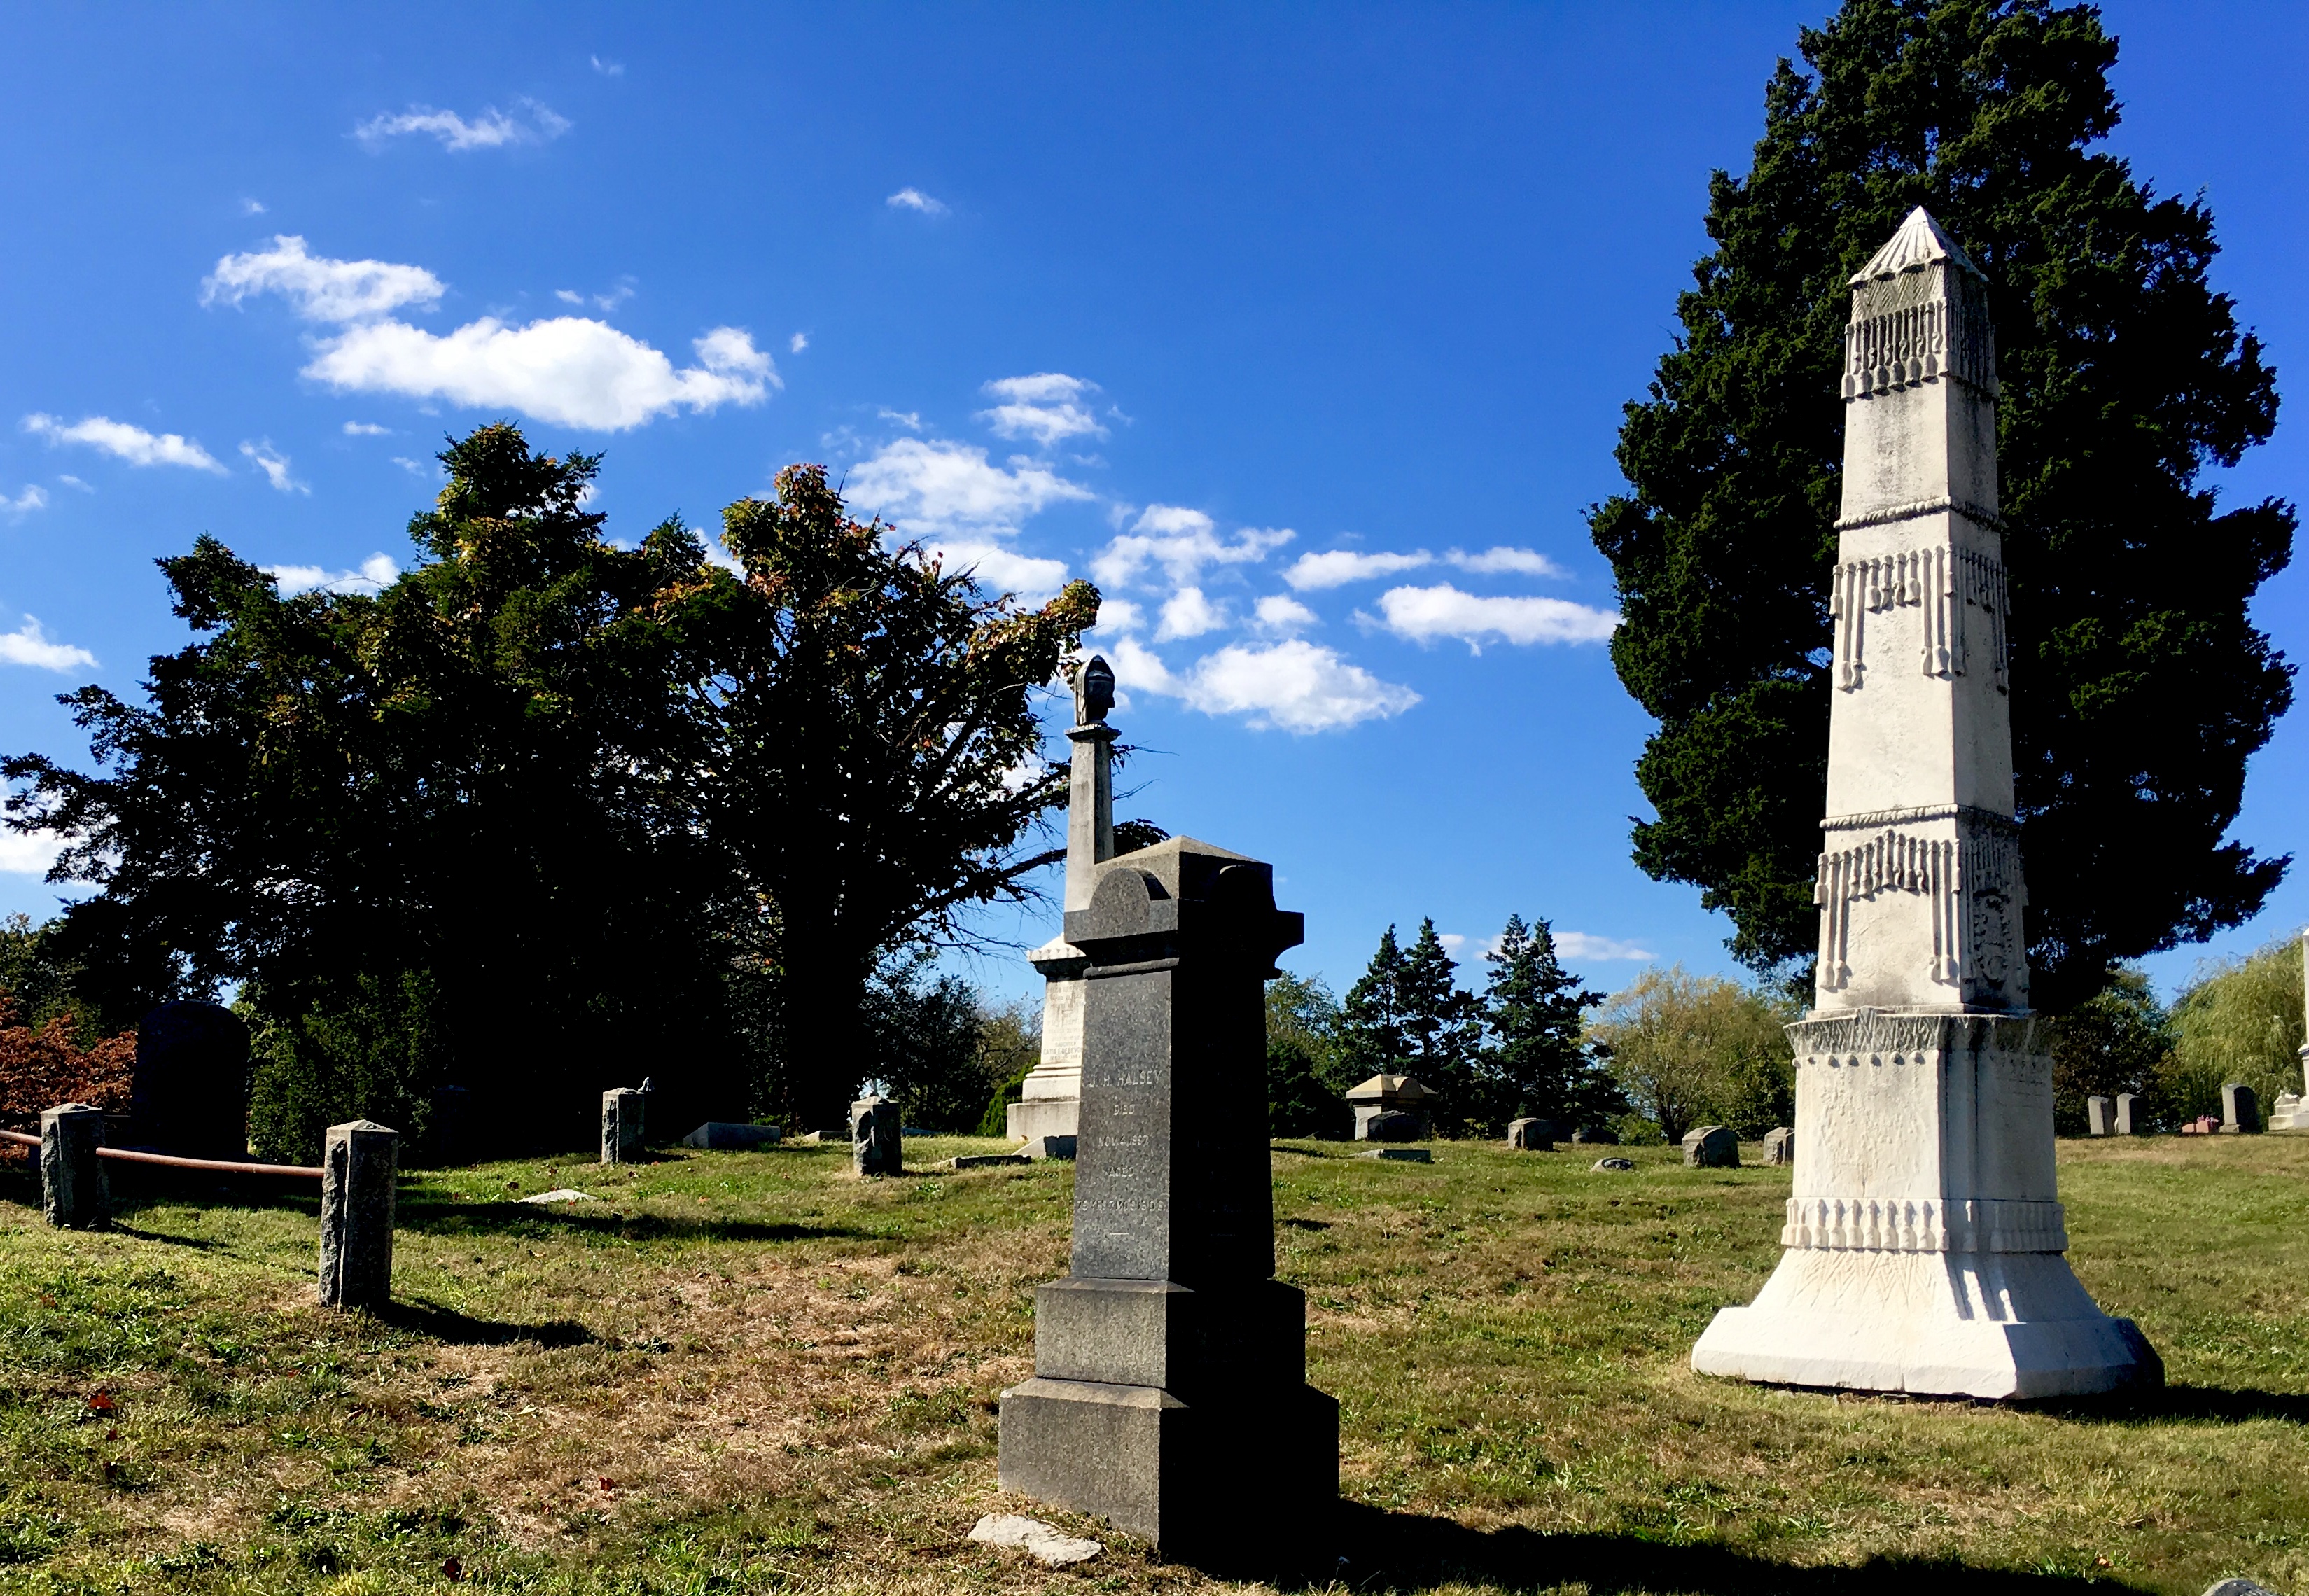 The elaborately decorated obelisk at right marks the grave of Oliver Halsey. Eagle photo by Lore Croghan